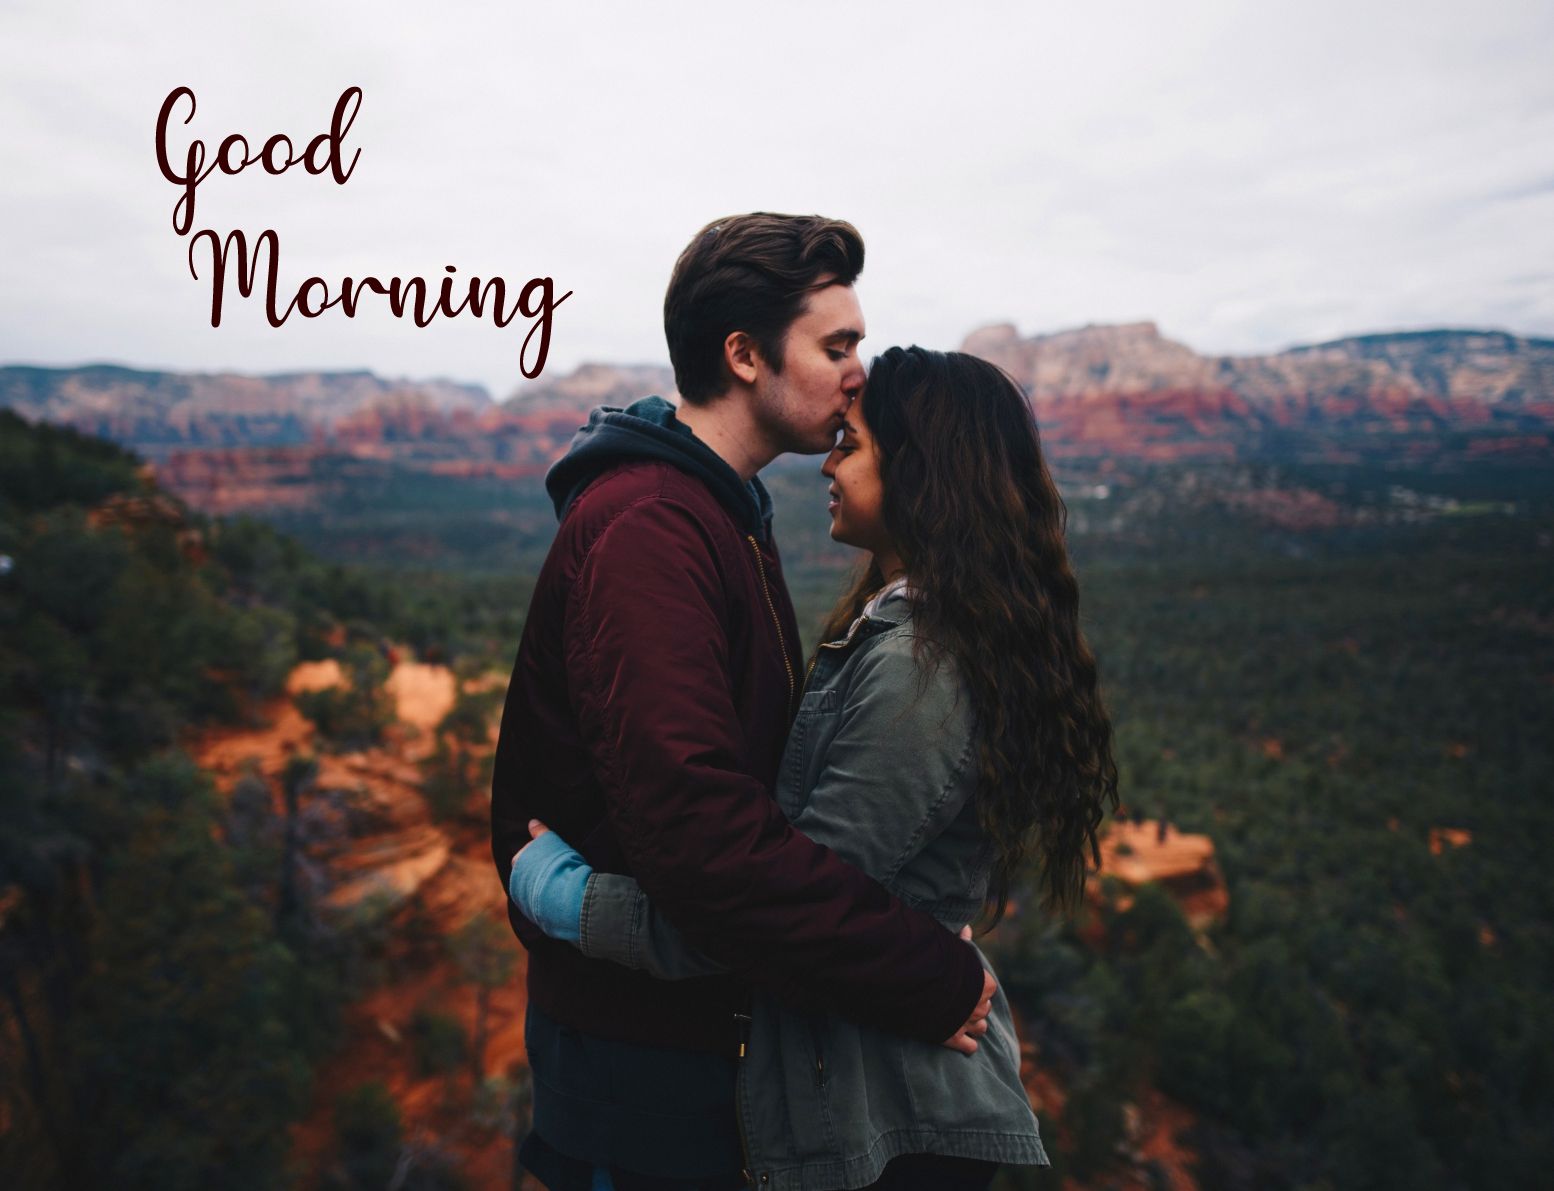 Morning Couple Wallpapers Wallpaper Cave